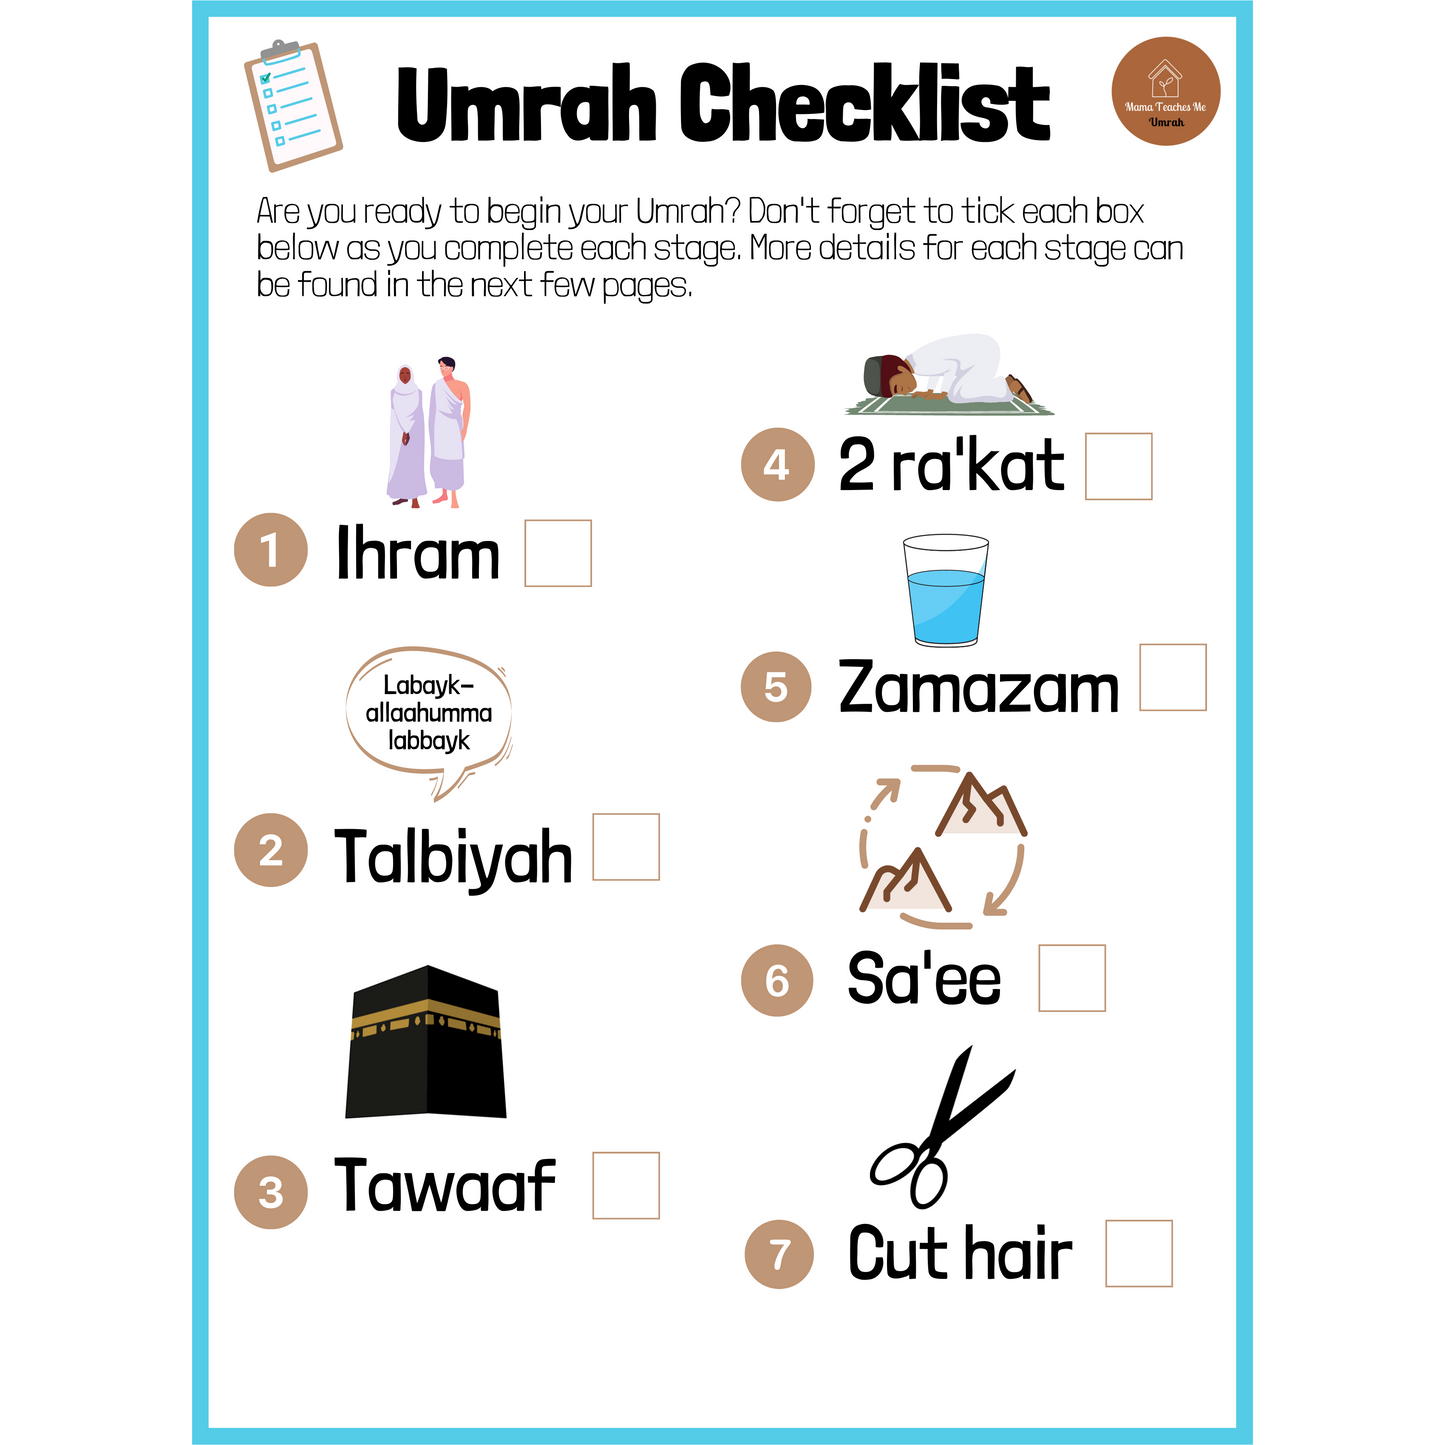 My First Guide to Umrah